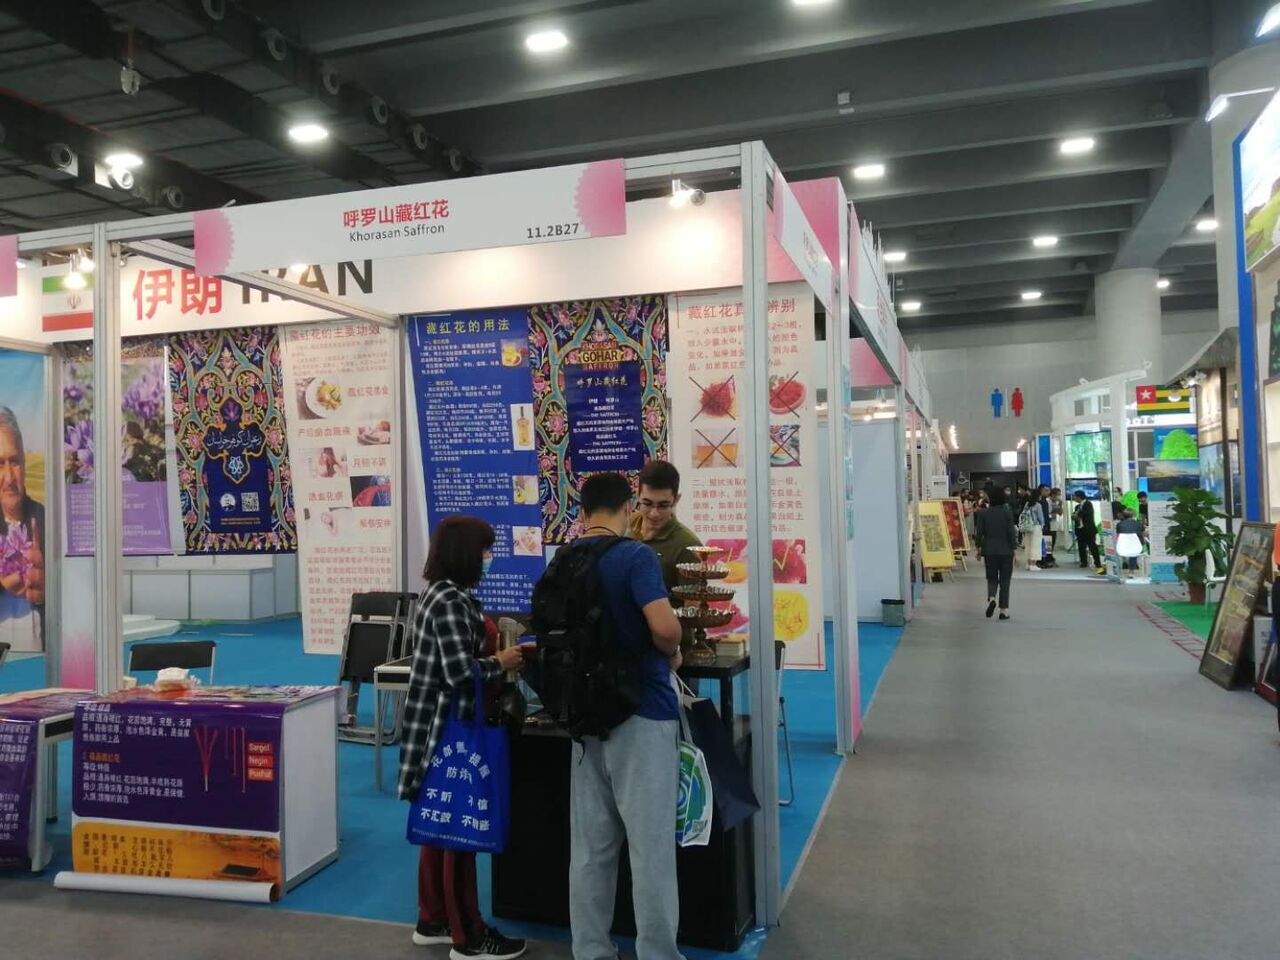 Iran attending Maritime Silk Road exhibition in China